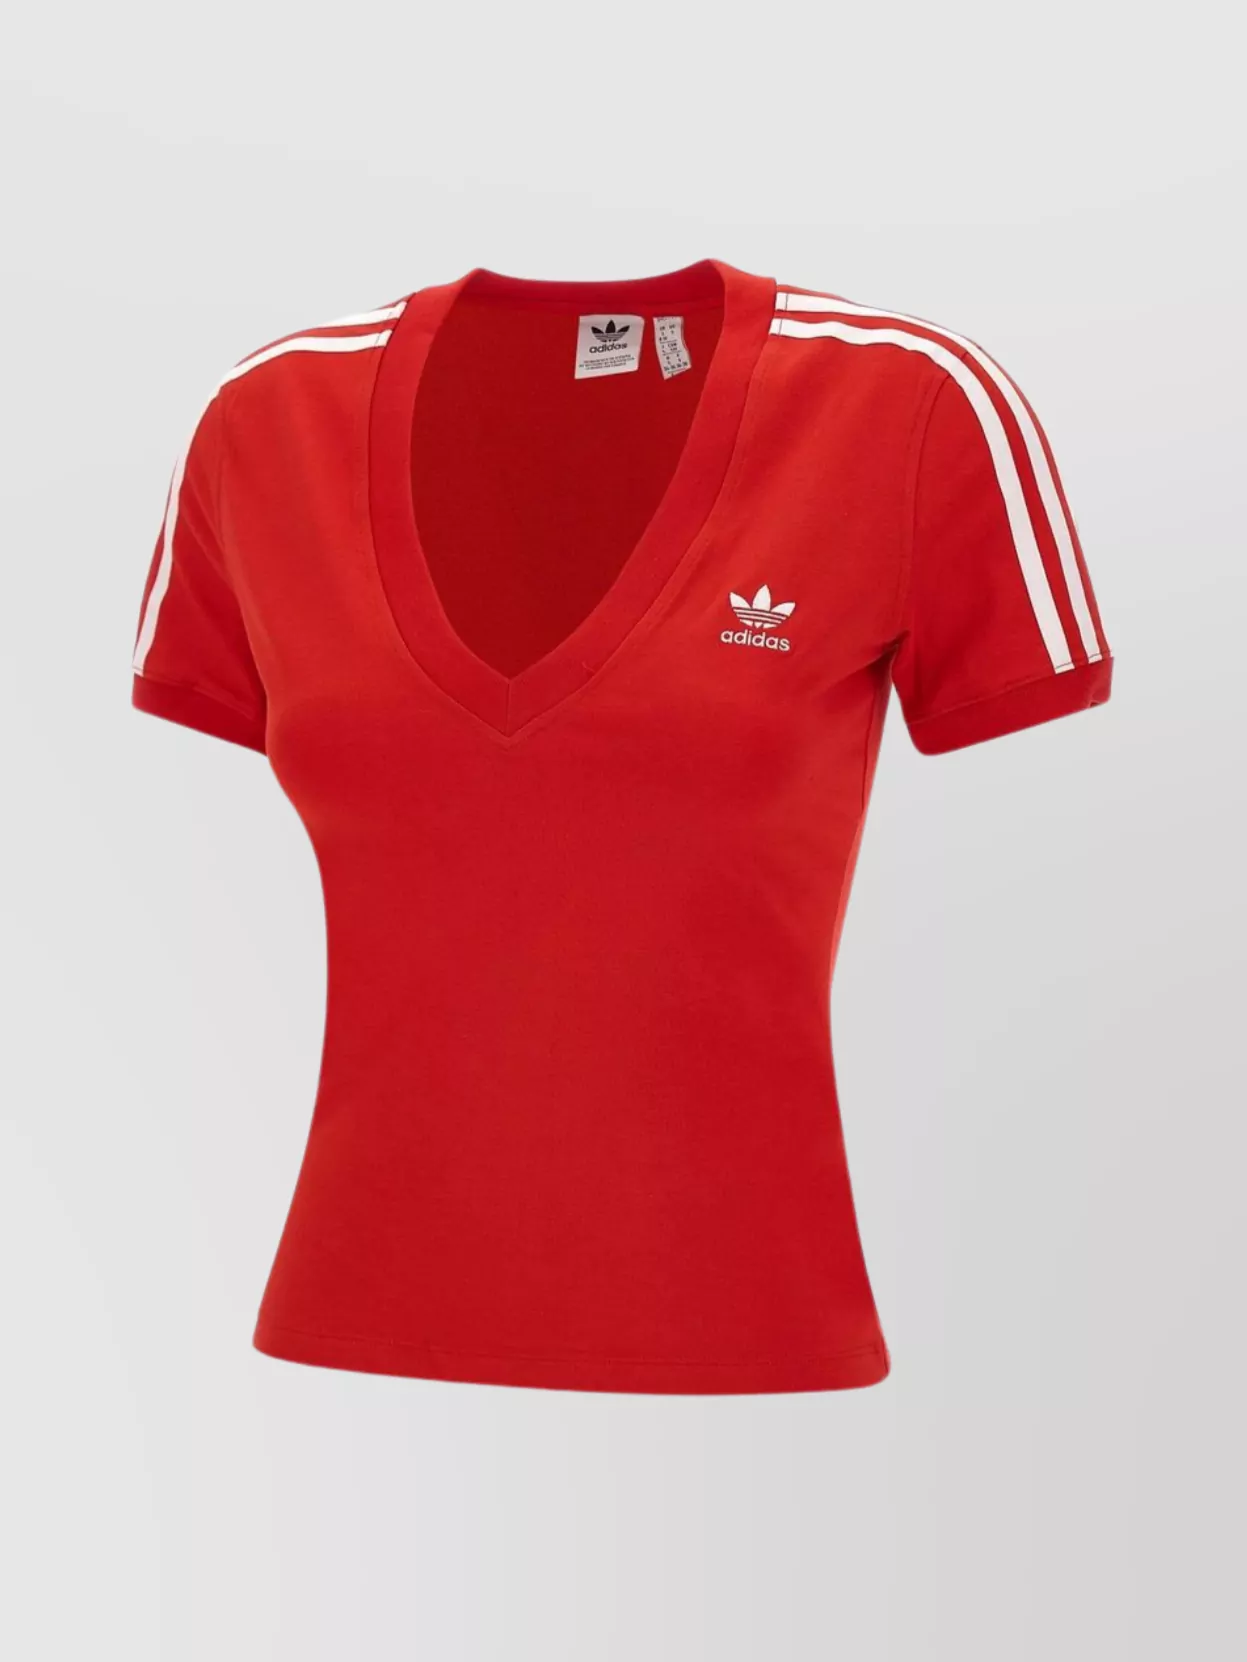 Adidas Originals Striped Sleeve V-neck Cotton T-shirt In Red